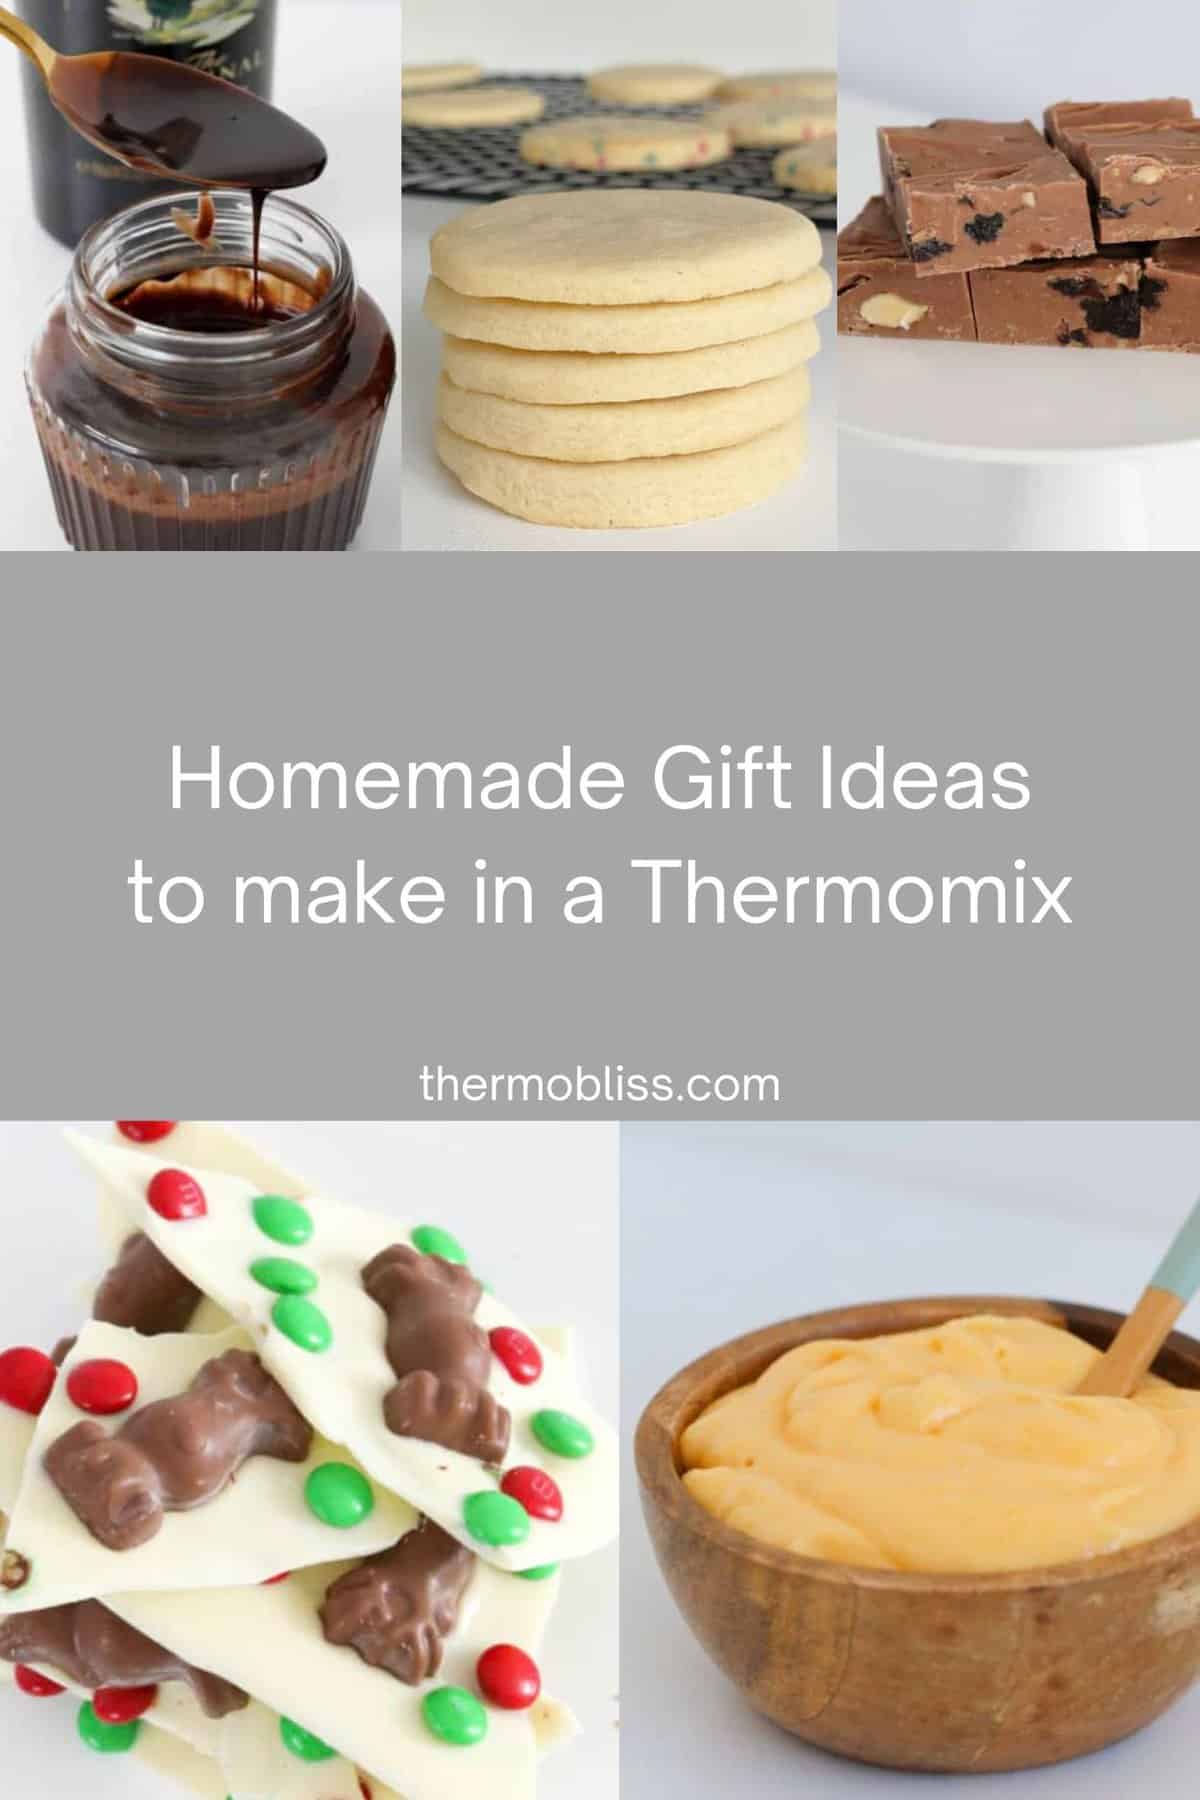 Collage of recipes that can be made to give as gifts in a Thermomix.